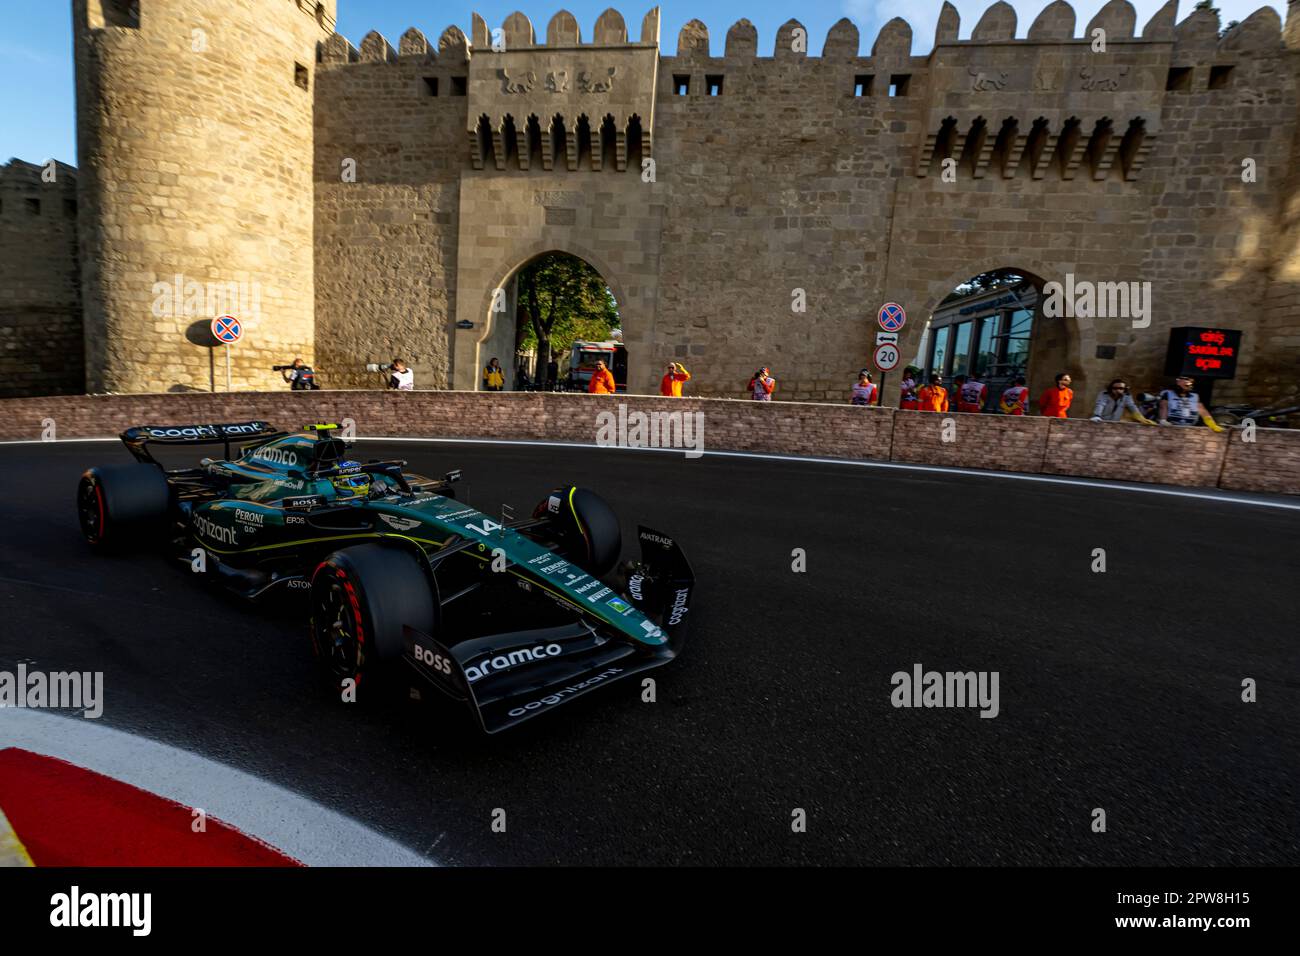 Baku, Azerbaijan, April 28, Lance Stroll, from Canada competes for Aston Martin F1. Qualifying, round 4 of the 2023 Formula 1 championship. Credit: Michael Potts/Alamy Live News Stock Photo